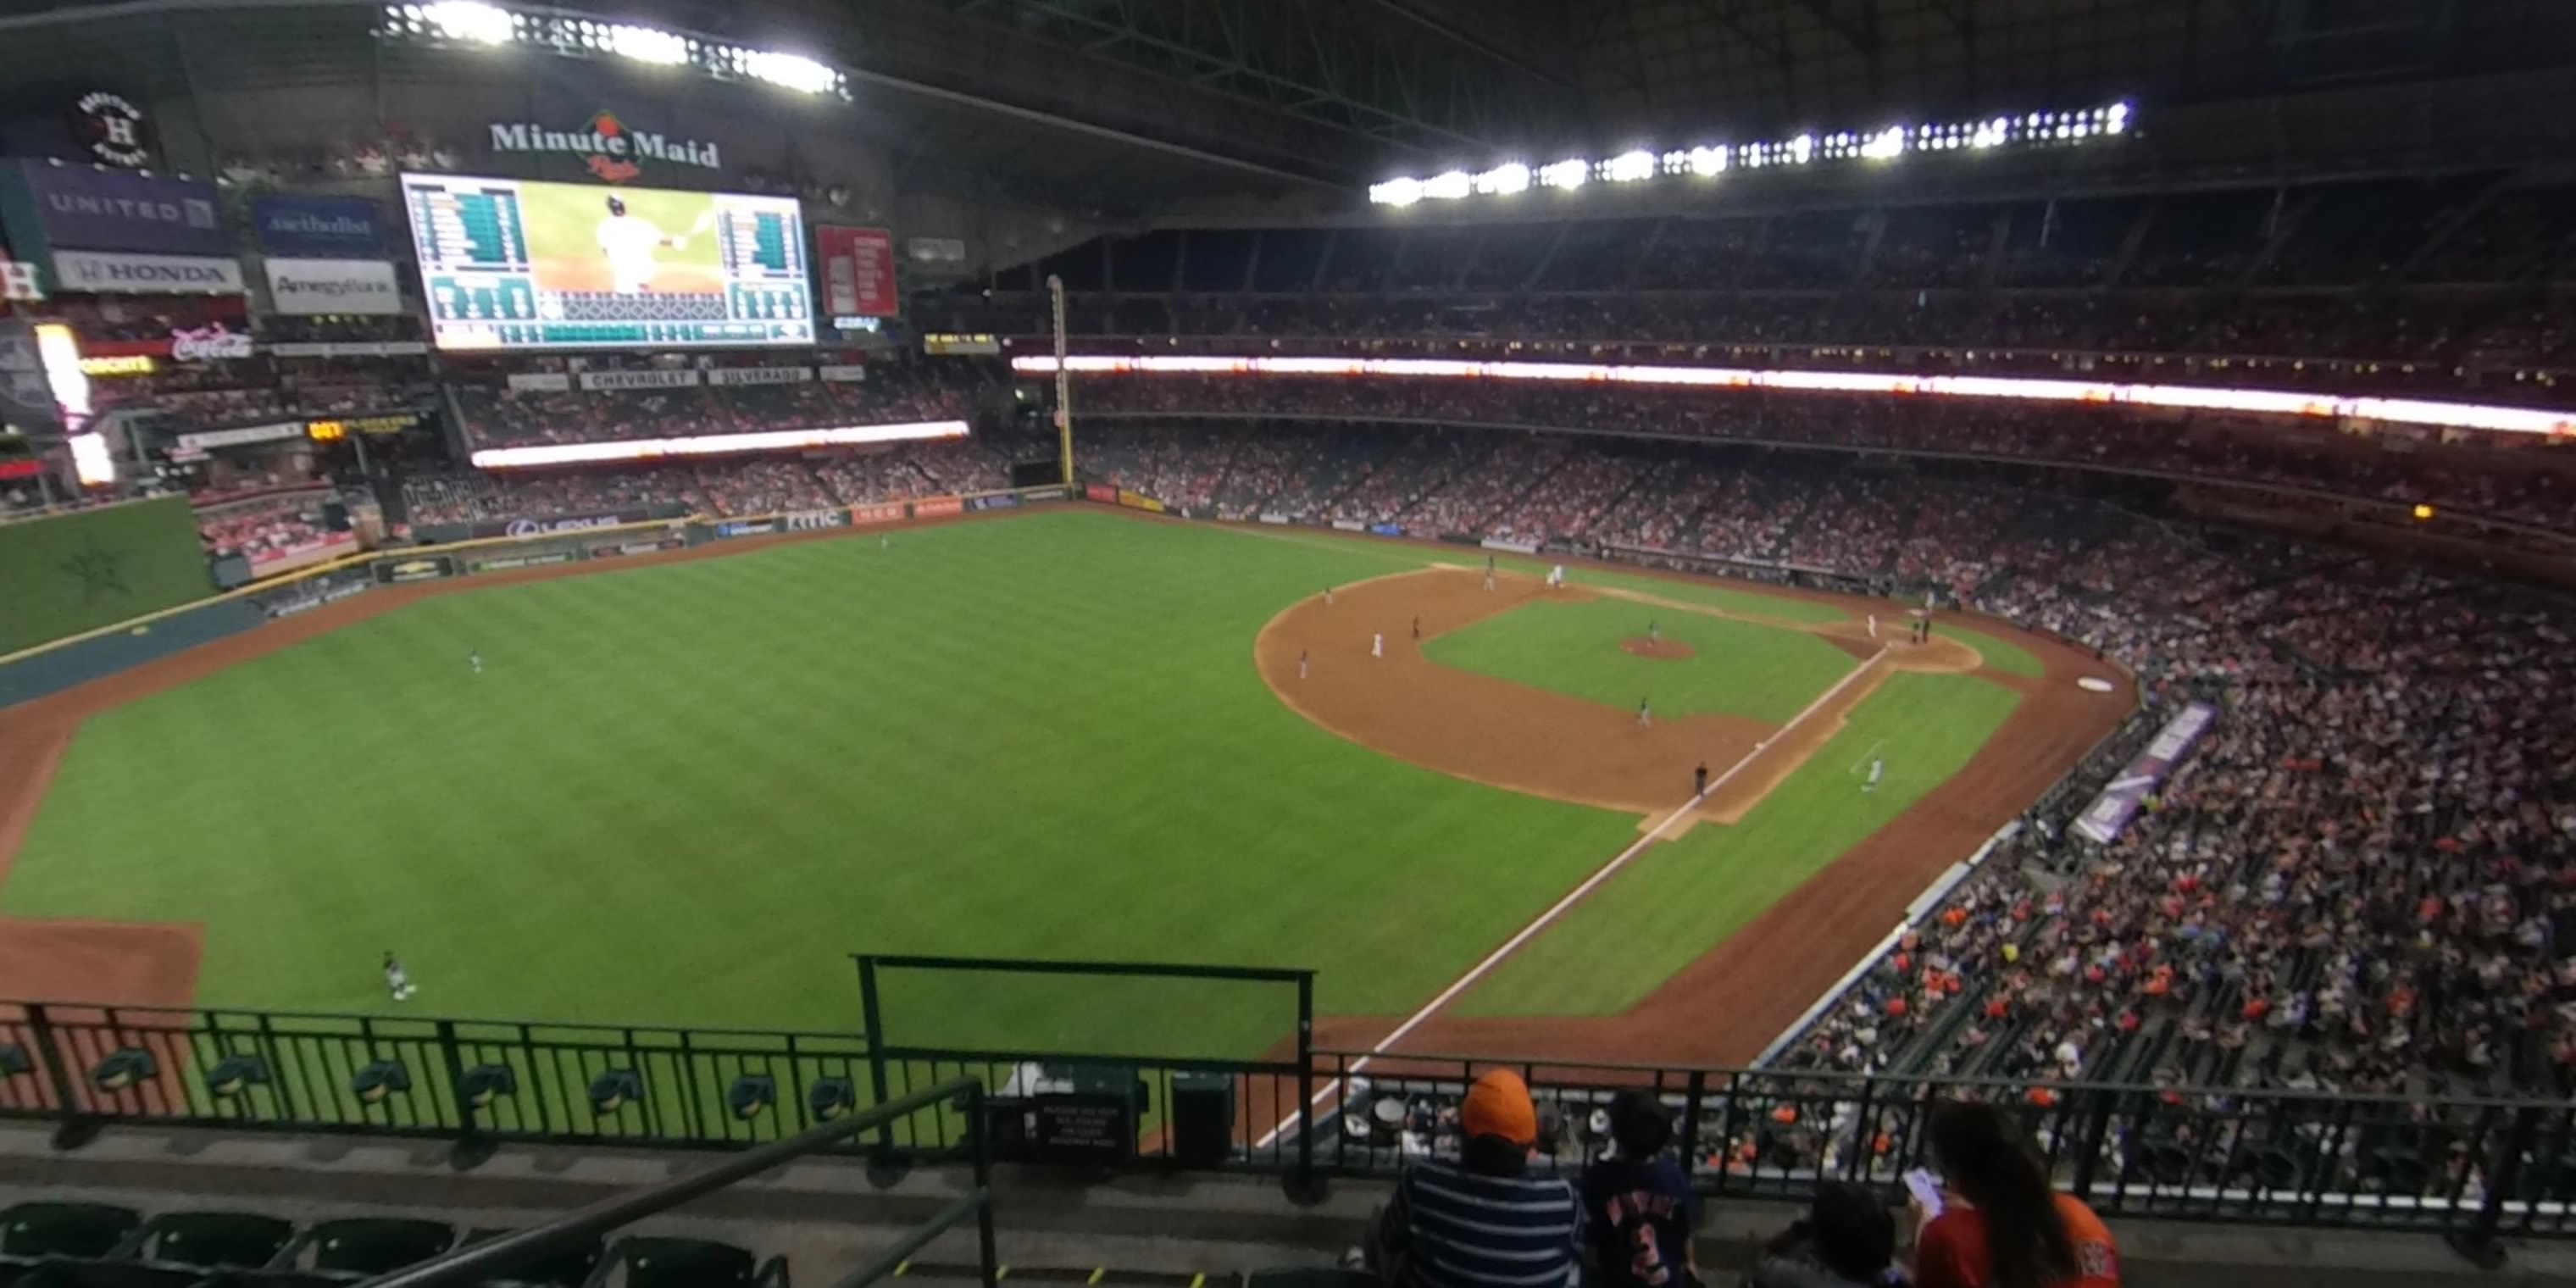 section 305 panoramic seat view  for baseball - minute maid park